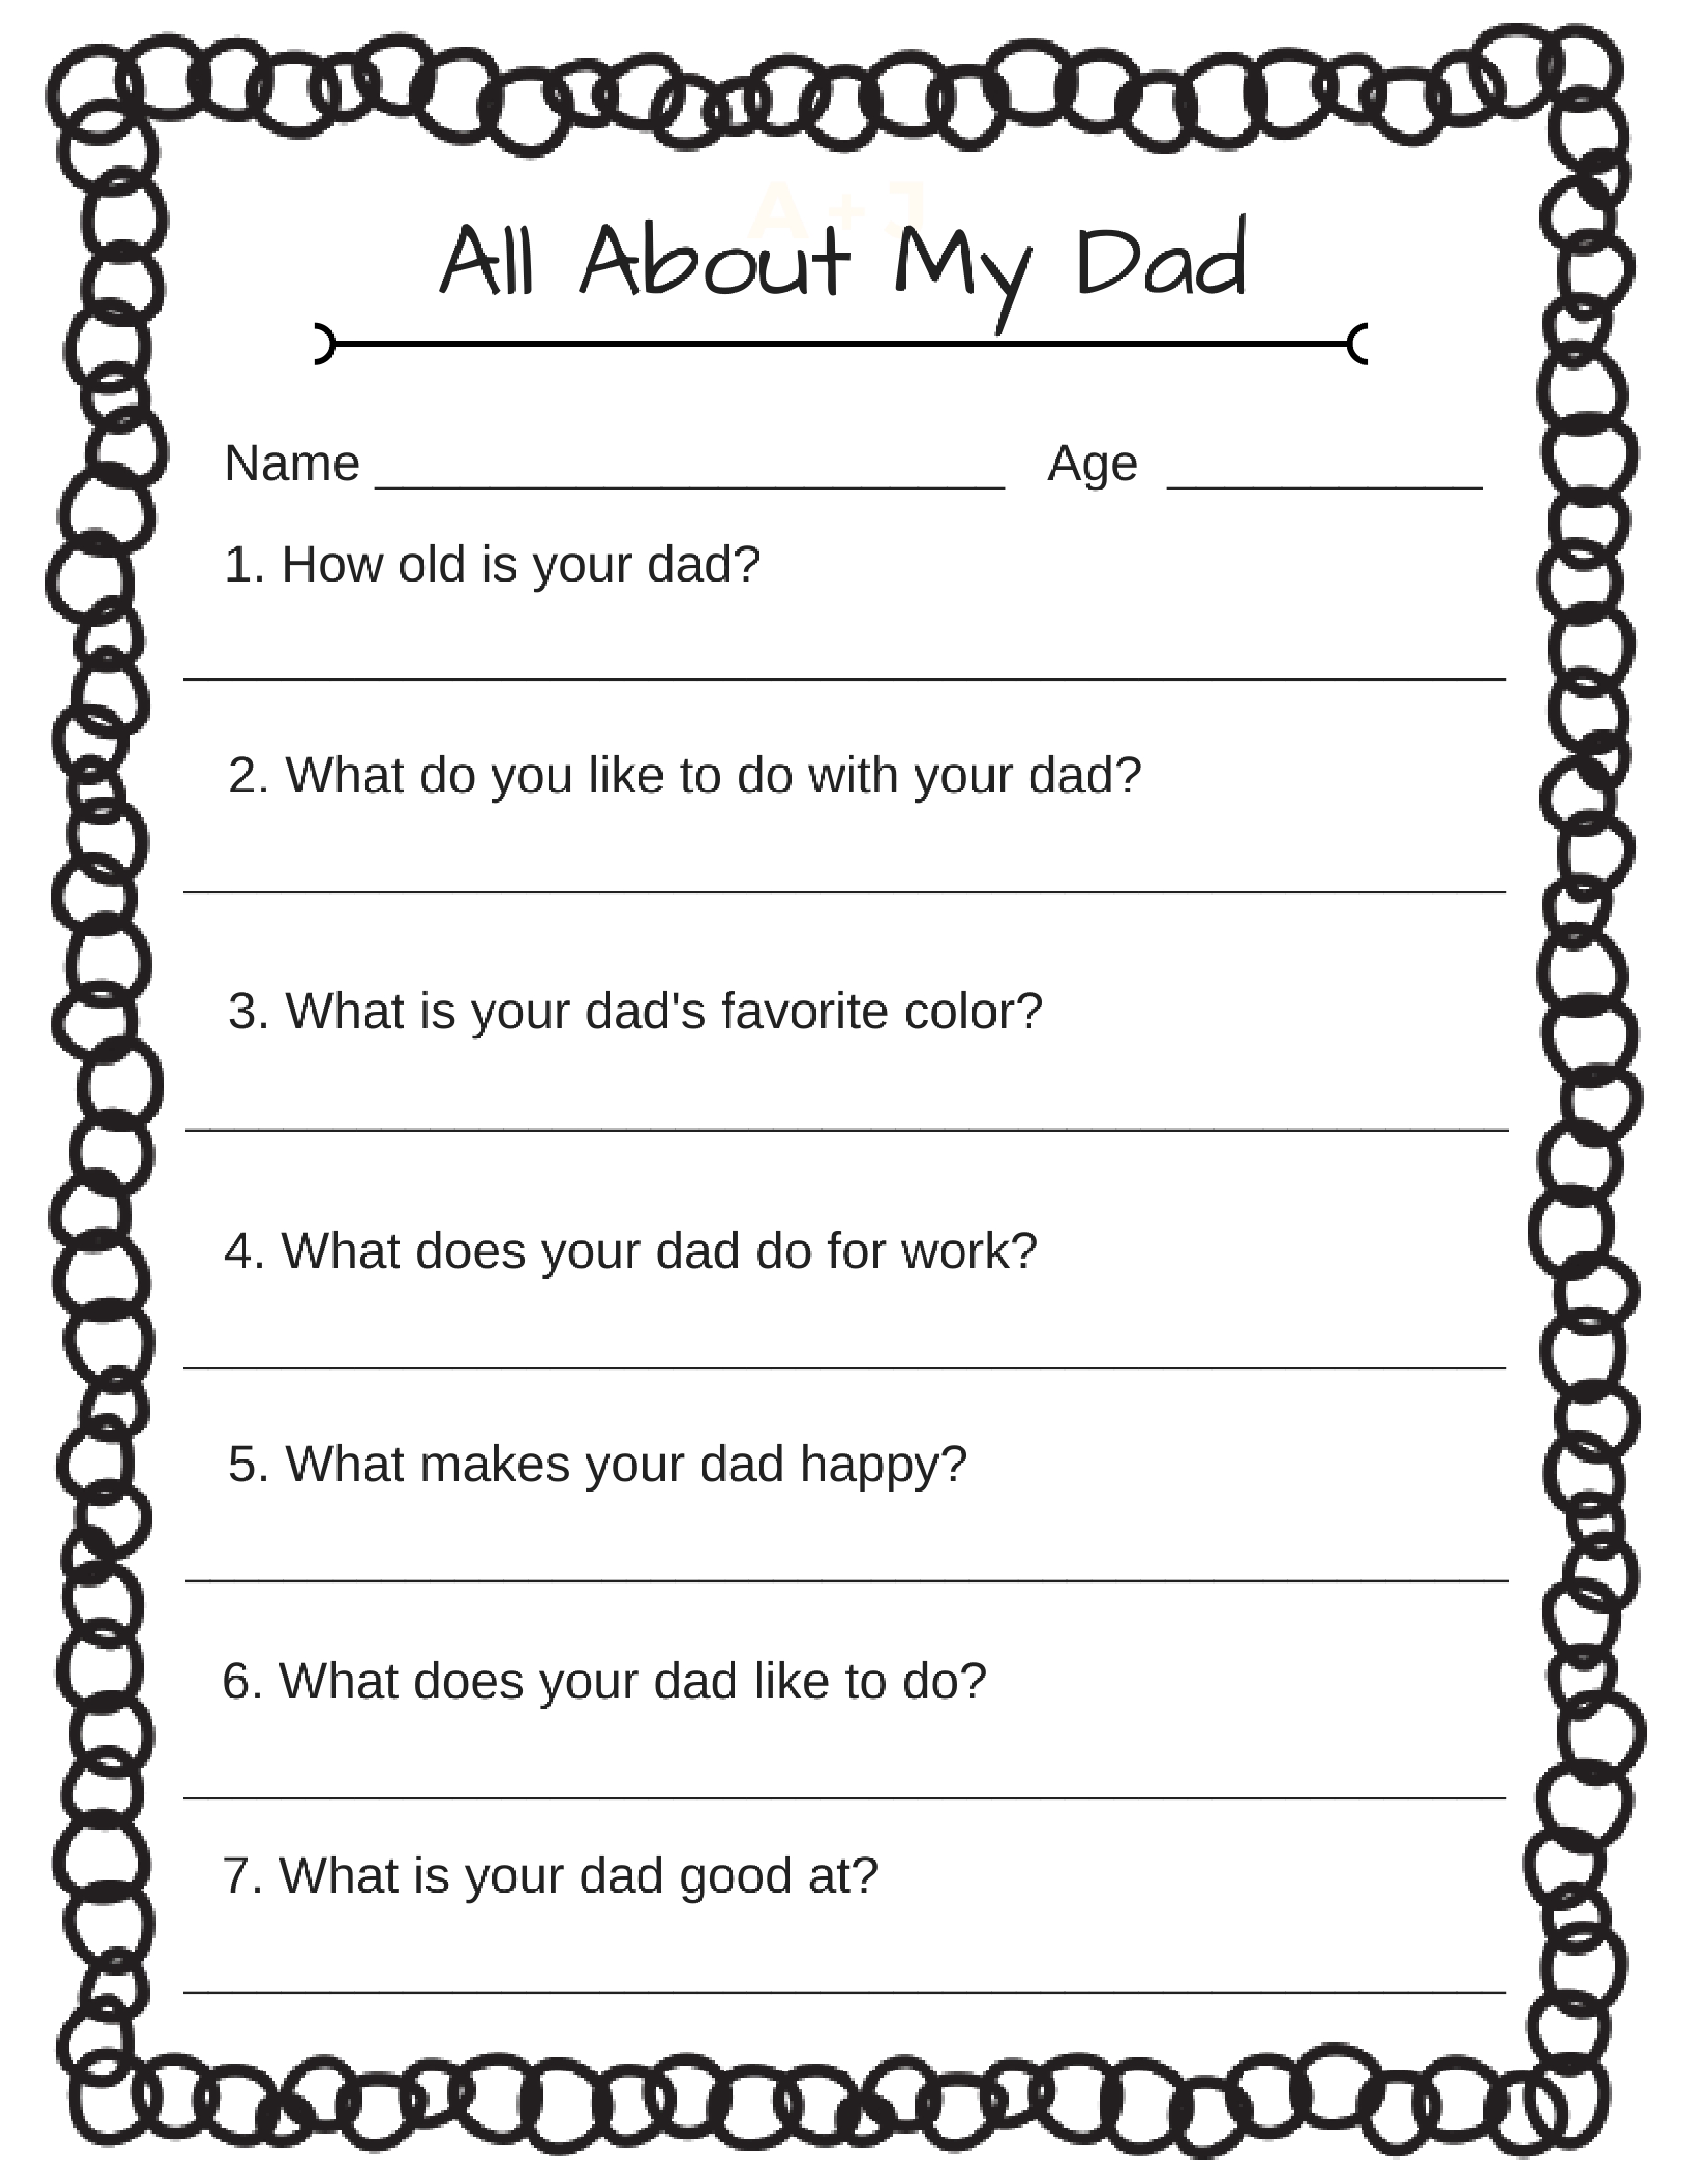 All about my dad, a Father's Day interview printable